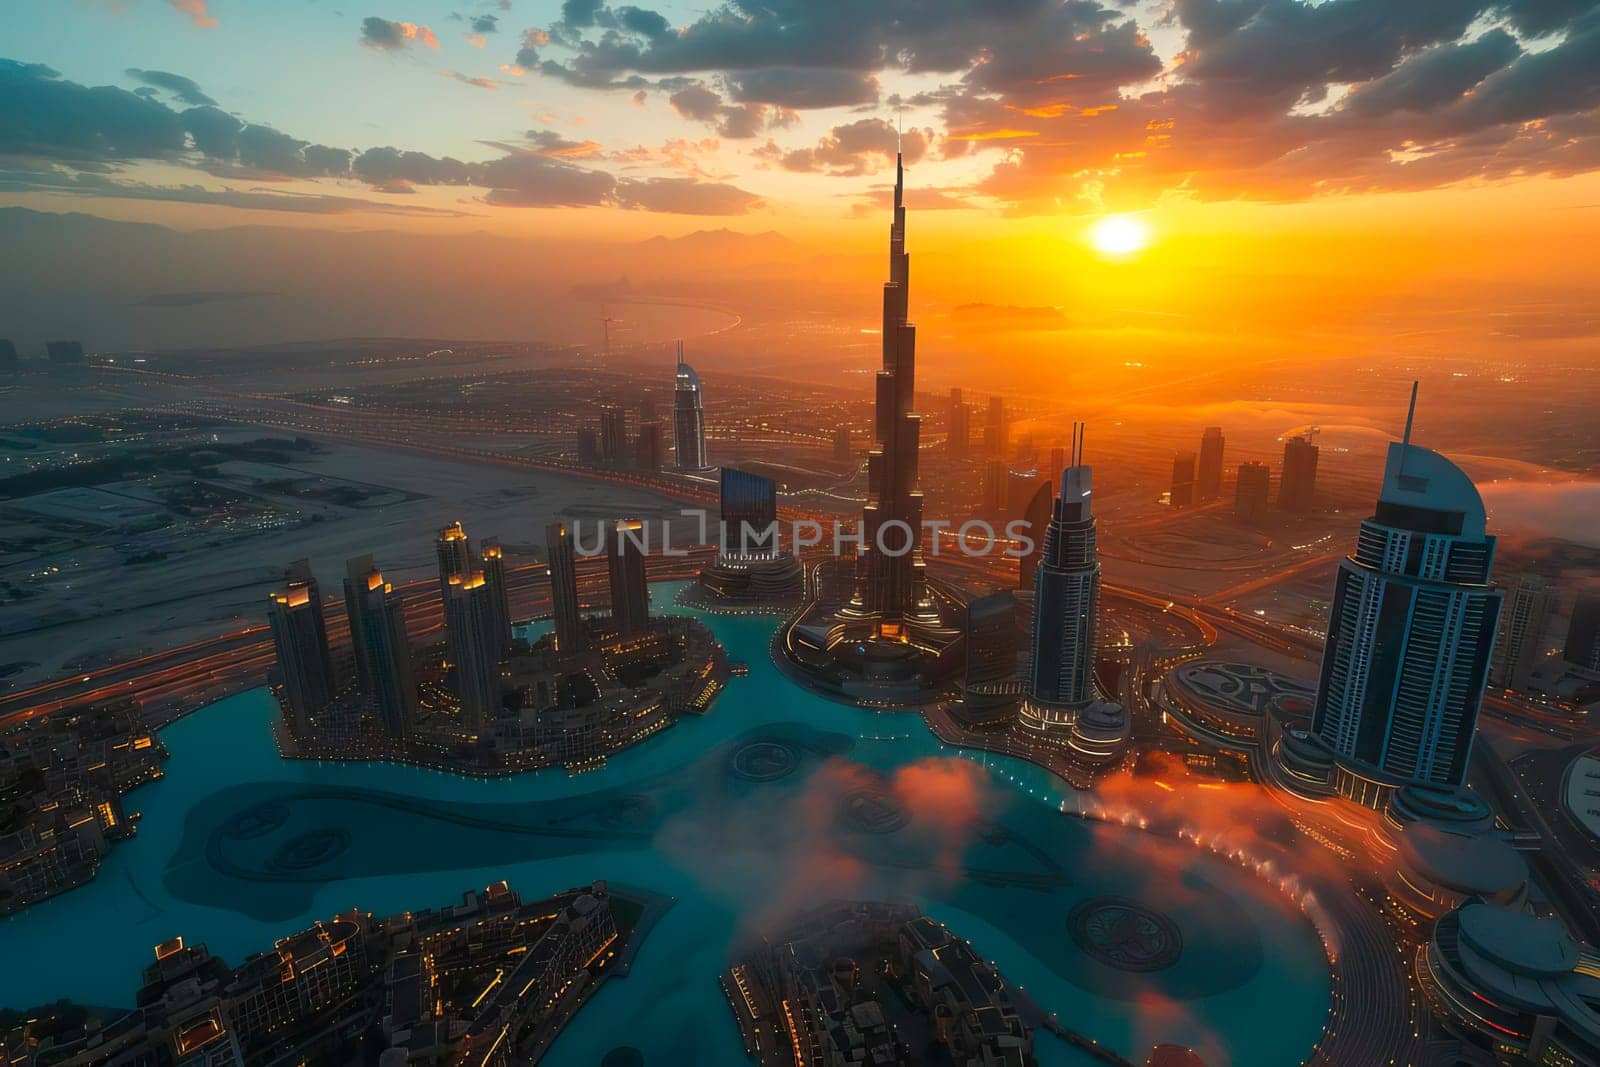 Cityscape captured from above as the sun sets, showcasing buildings and streets glowing in the warm light. by vladimka